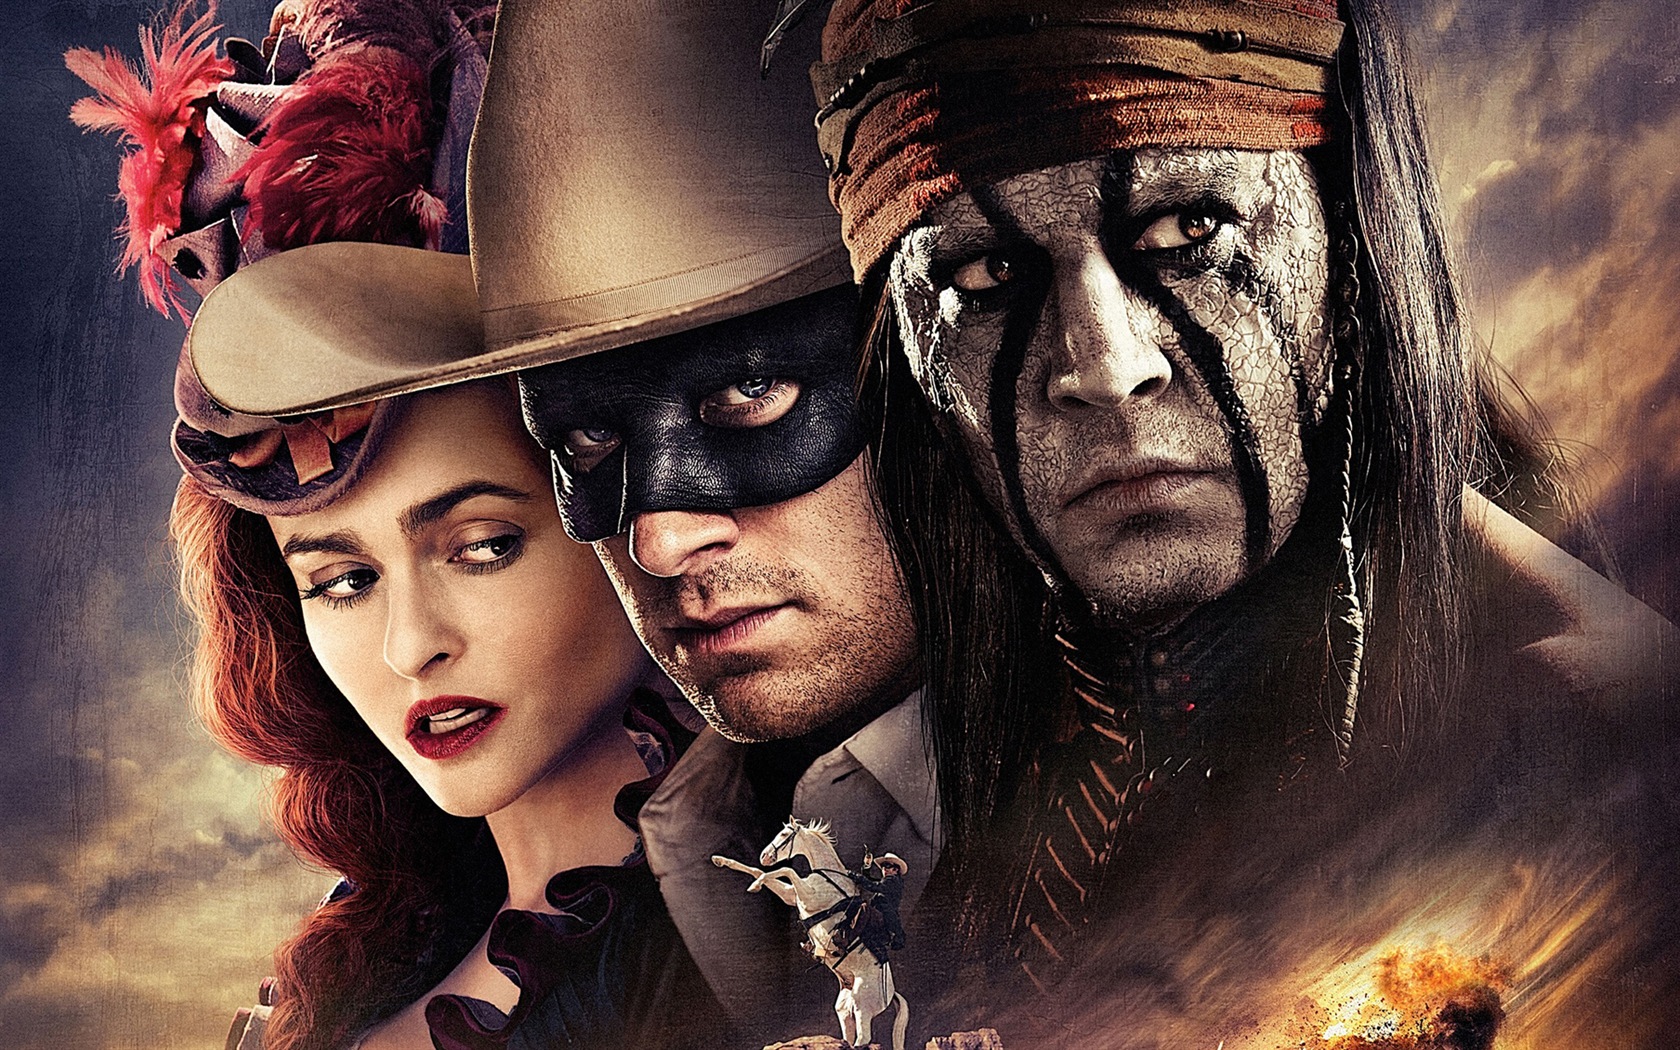 The Lone Ranger HD movie wallpapers #1 - 1680x1050